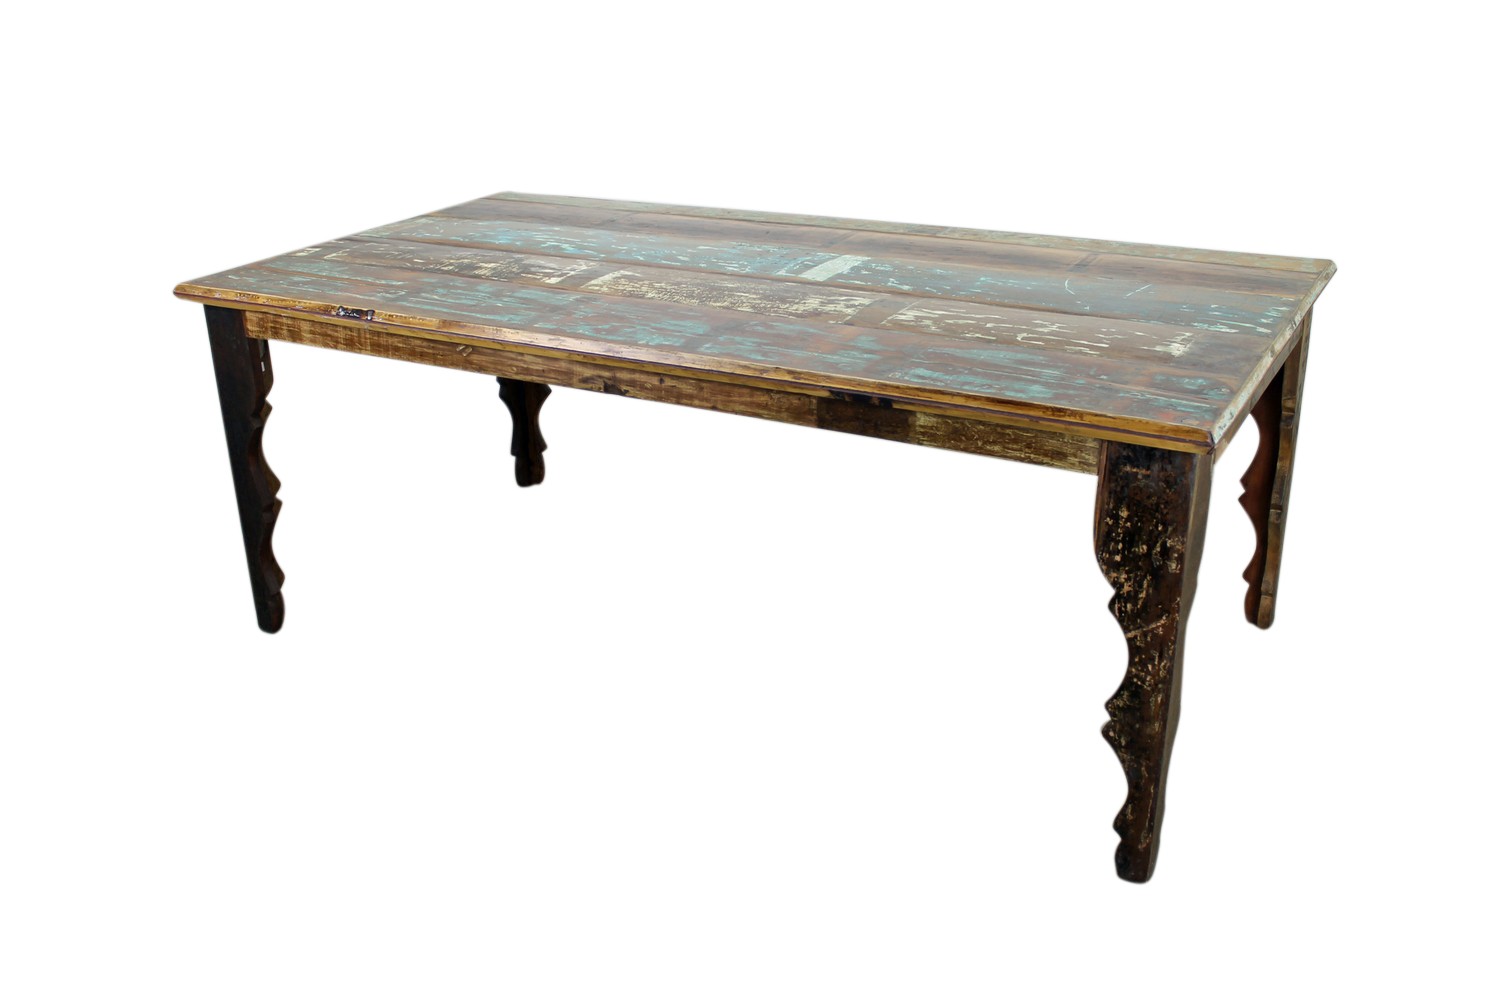 mexicali-distressed-finish-dining-table.jpg